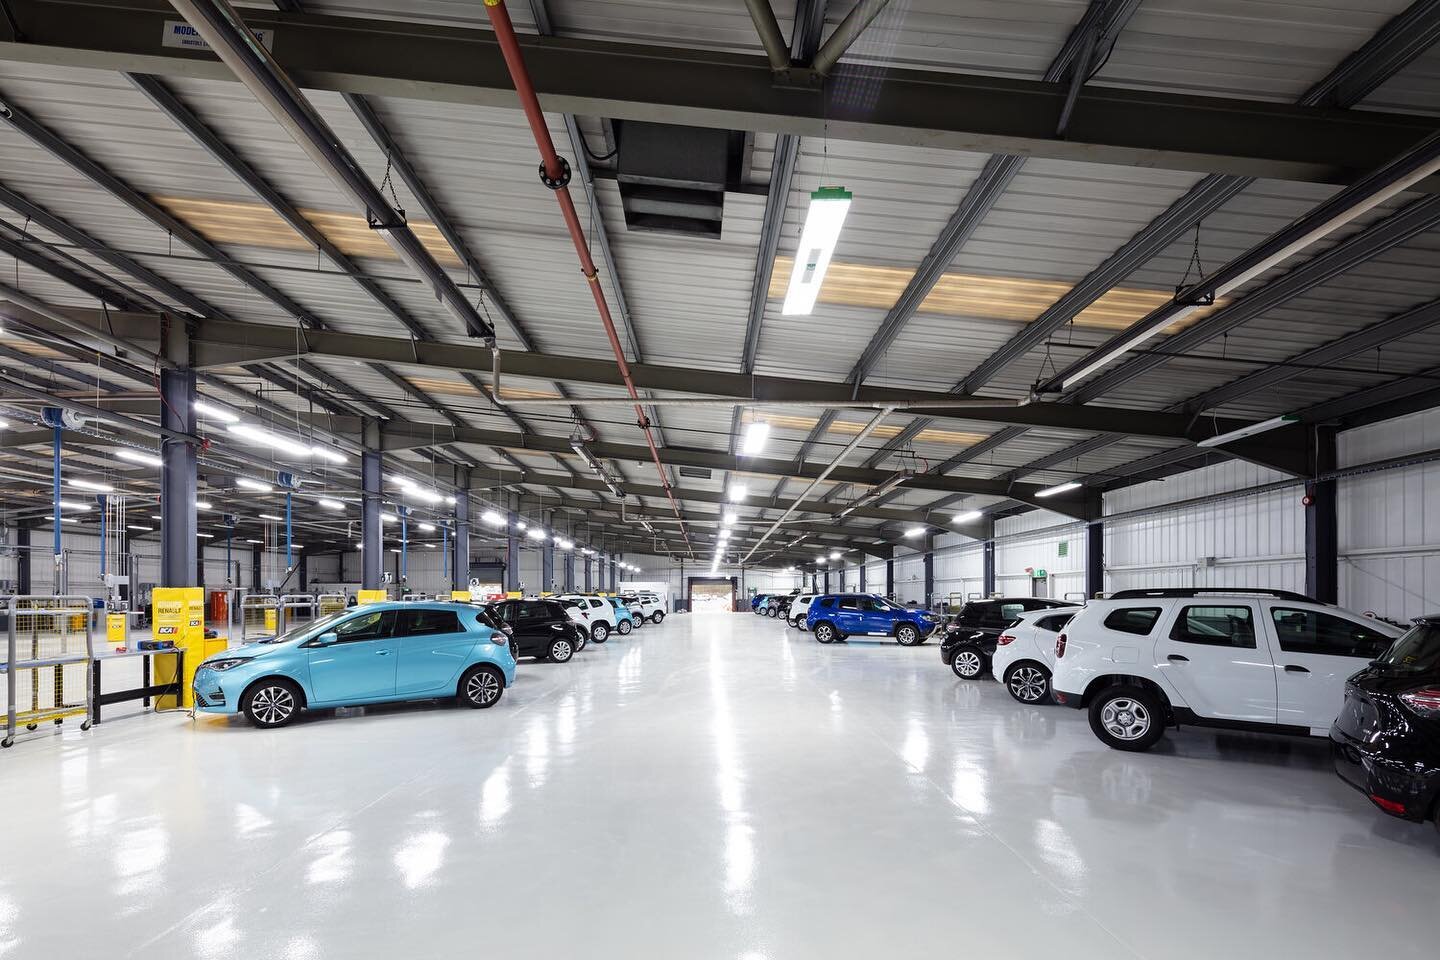 BCA | Renault, Portbury. 

Vehicle maintenance &amp; refurbishment service centre. 

More photos to share with you all soon!

#cars #bca #cars #carcare #sales #marketing #architecture #architects #service #specialist #bristol #fleet #management